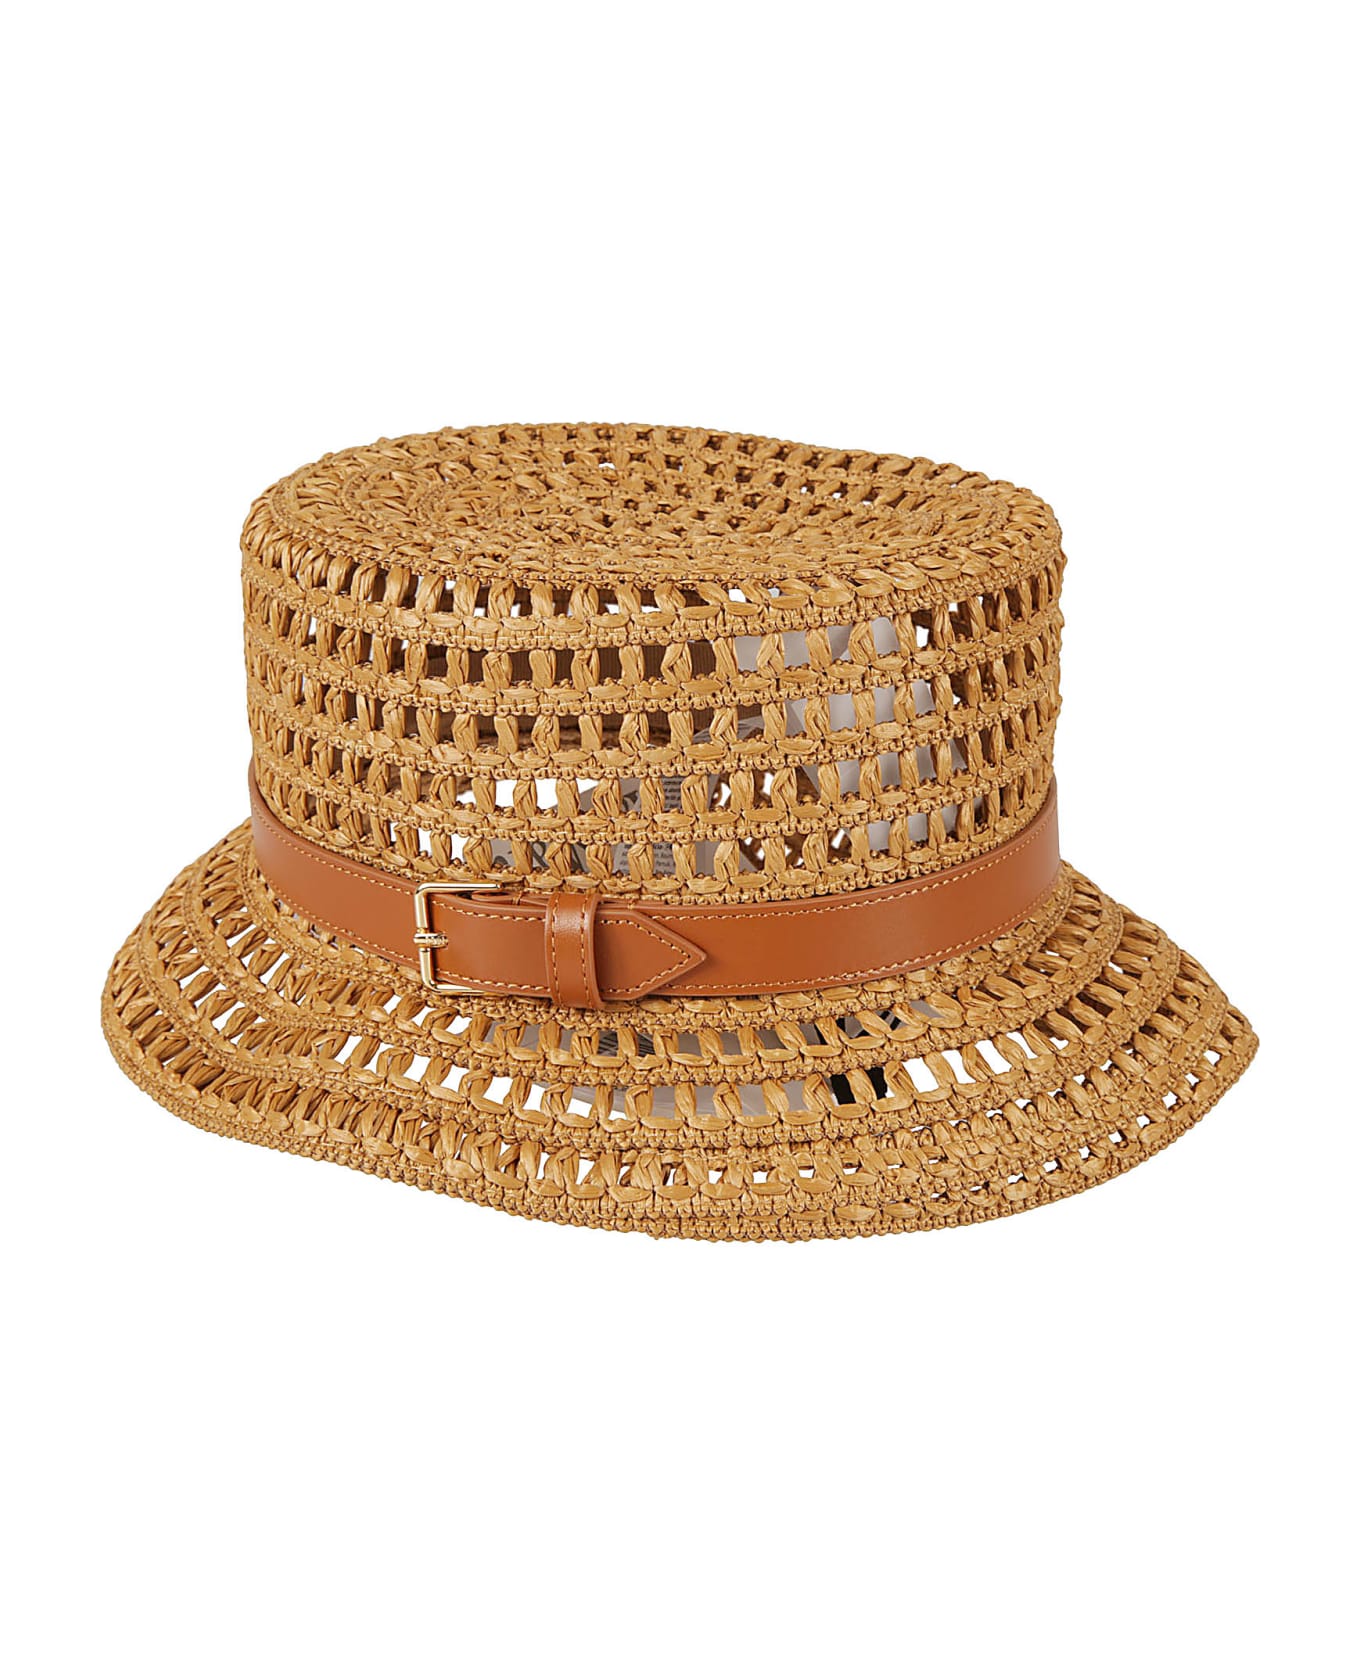 Max Mara Logo Plaque Perforated Woven Hat - BROWN 帽子